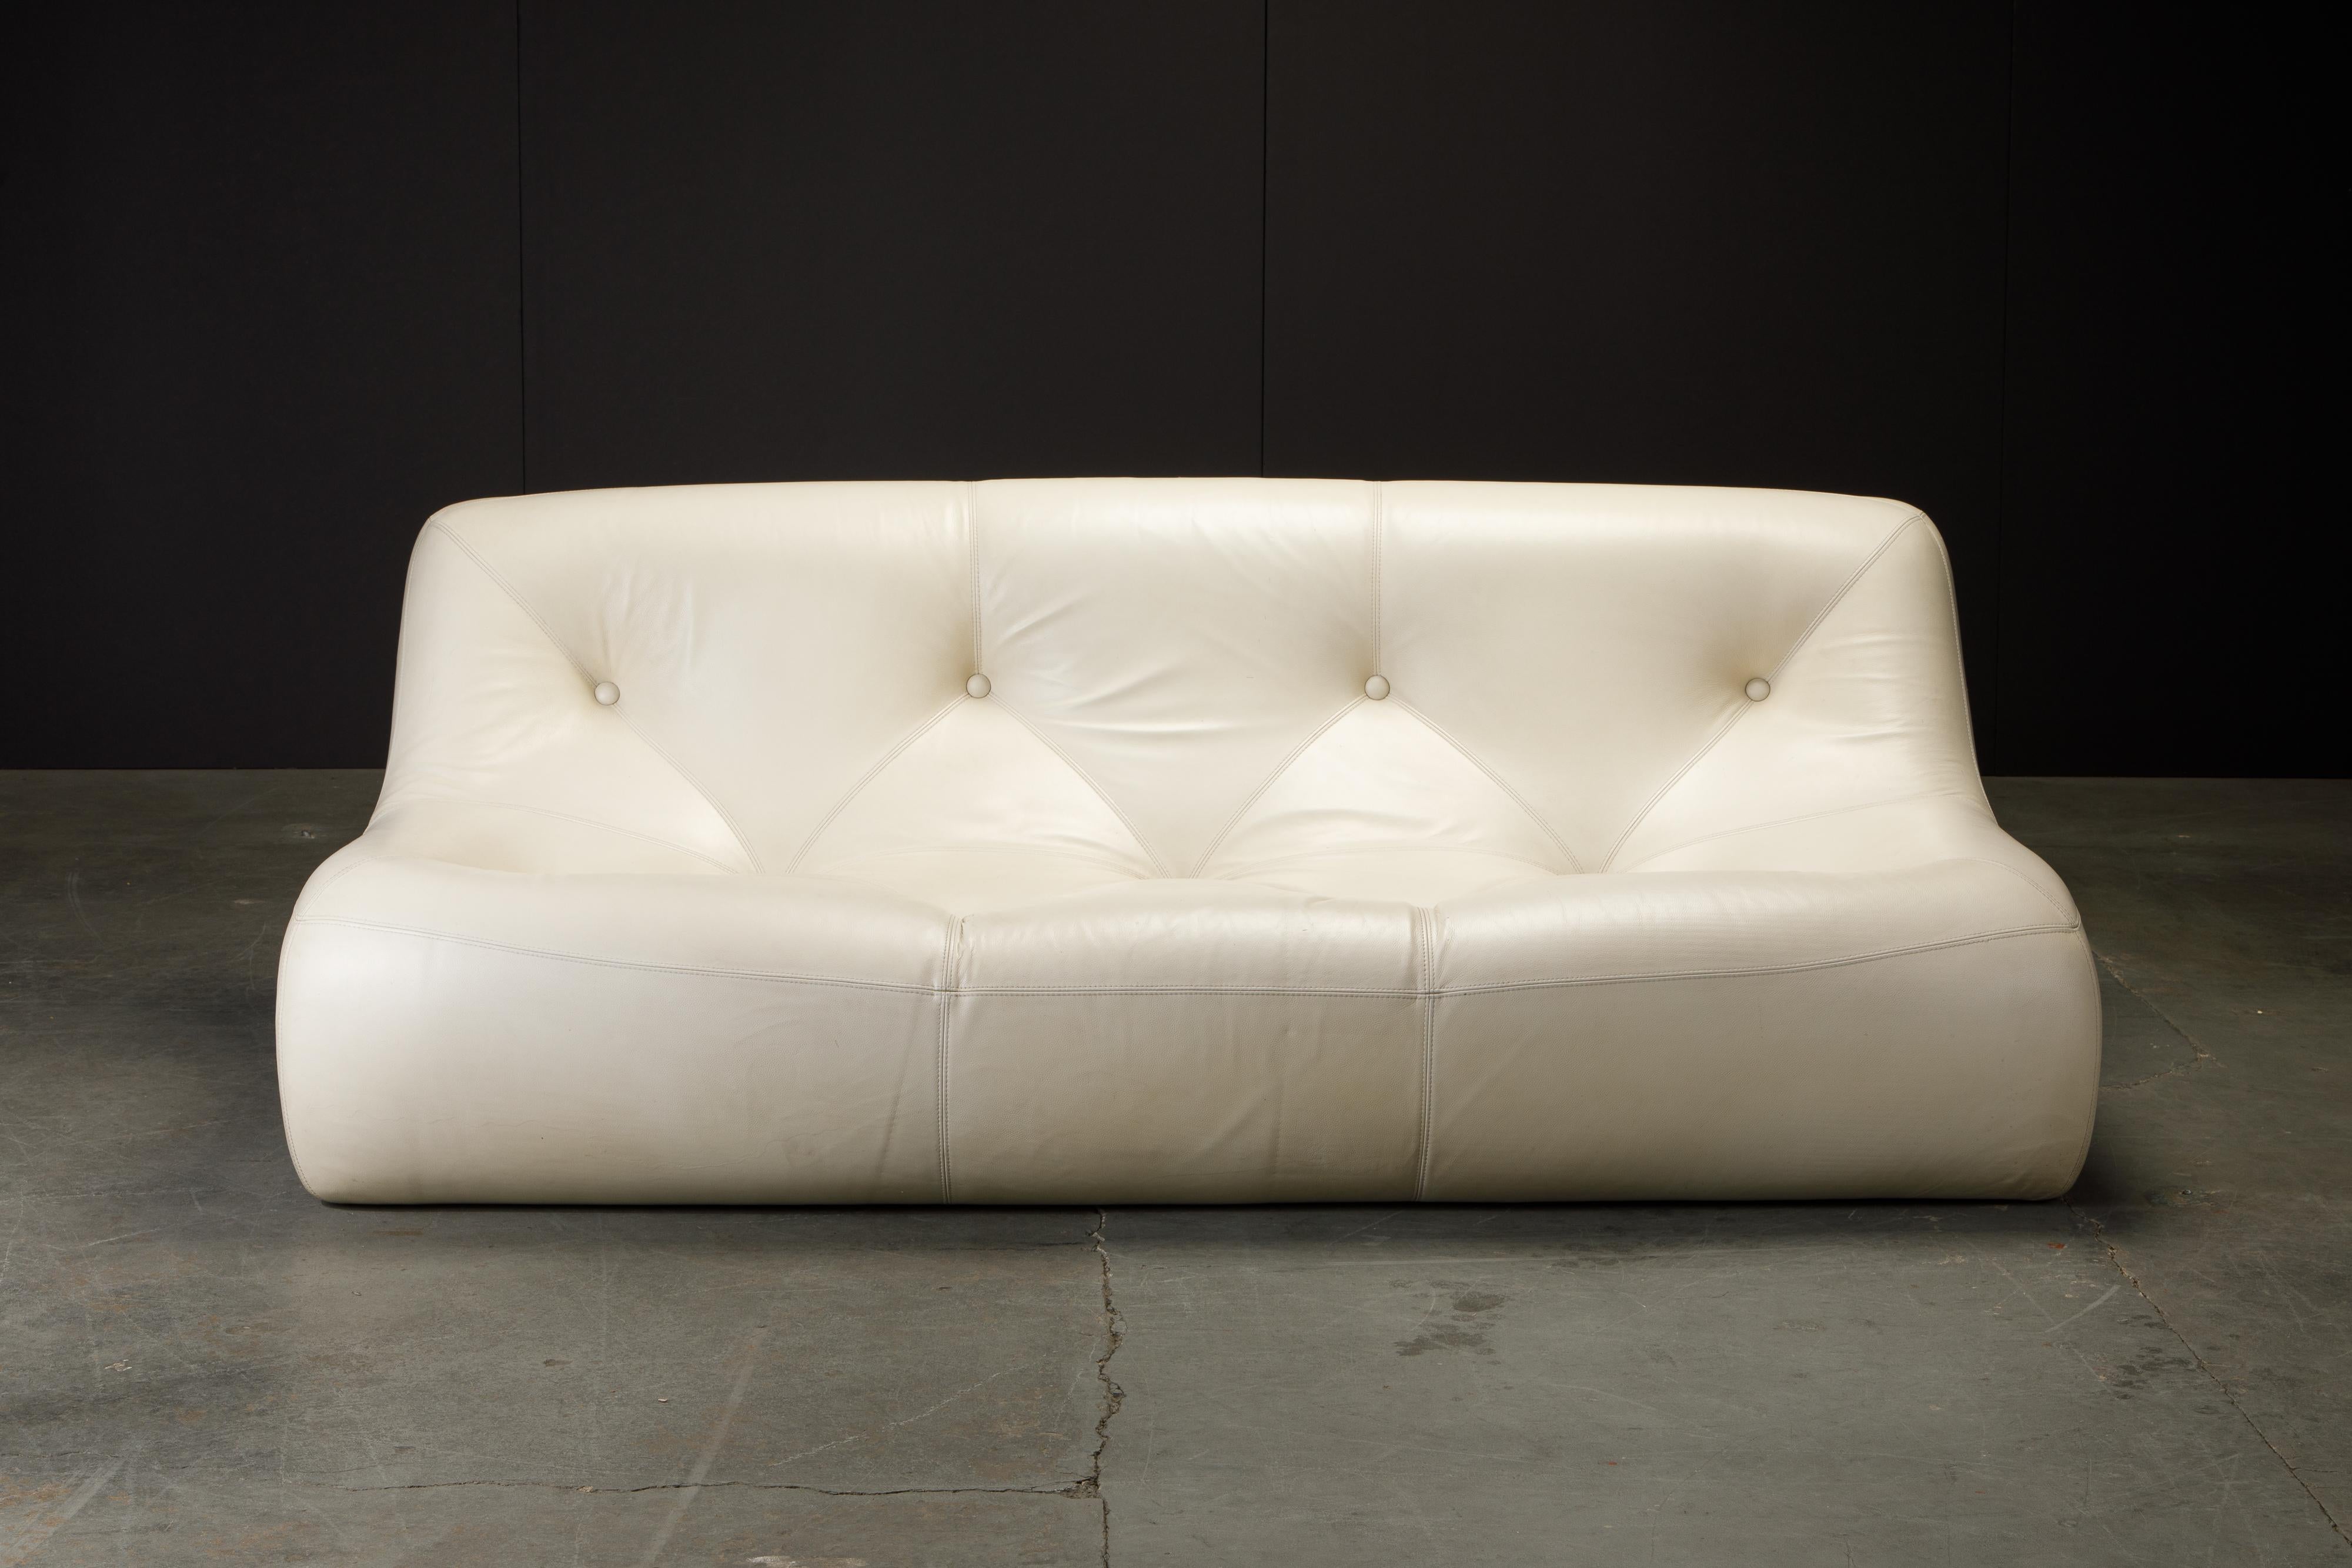 This 'Kali' leather sofa by Michel Ducaroy for Ligne Roset, France, was designed in the 1970s and is currently no longer in production making it a rare collectors piece. This example produced in circa 1990s to 2000s and upholstered in soft and